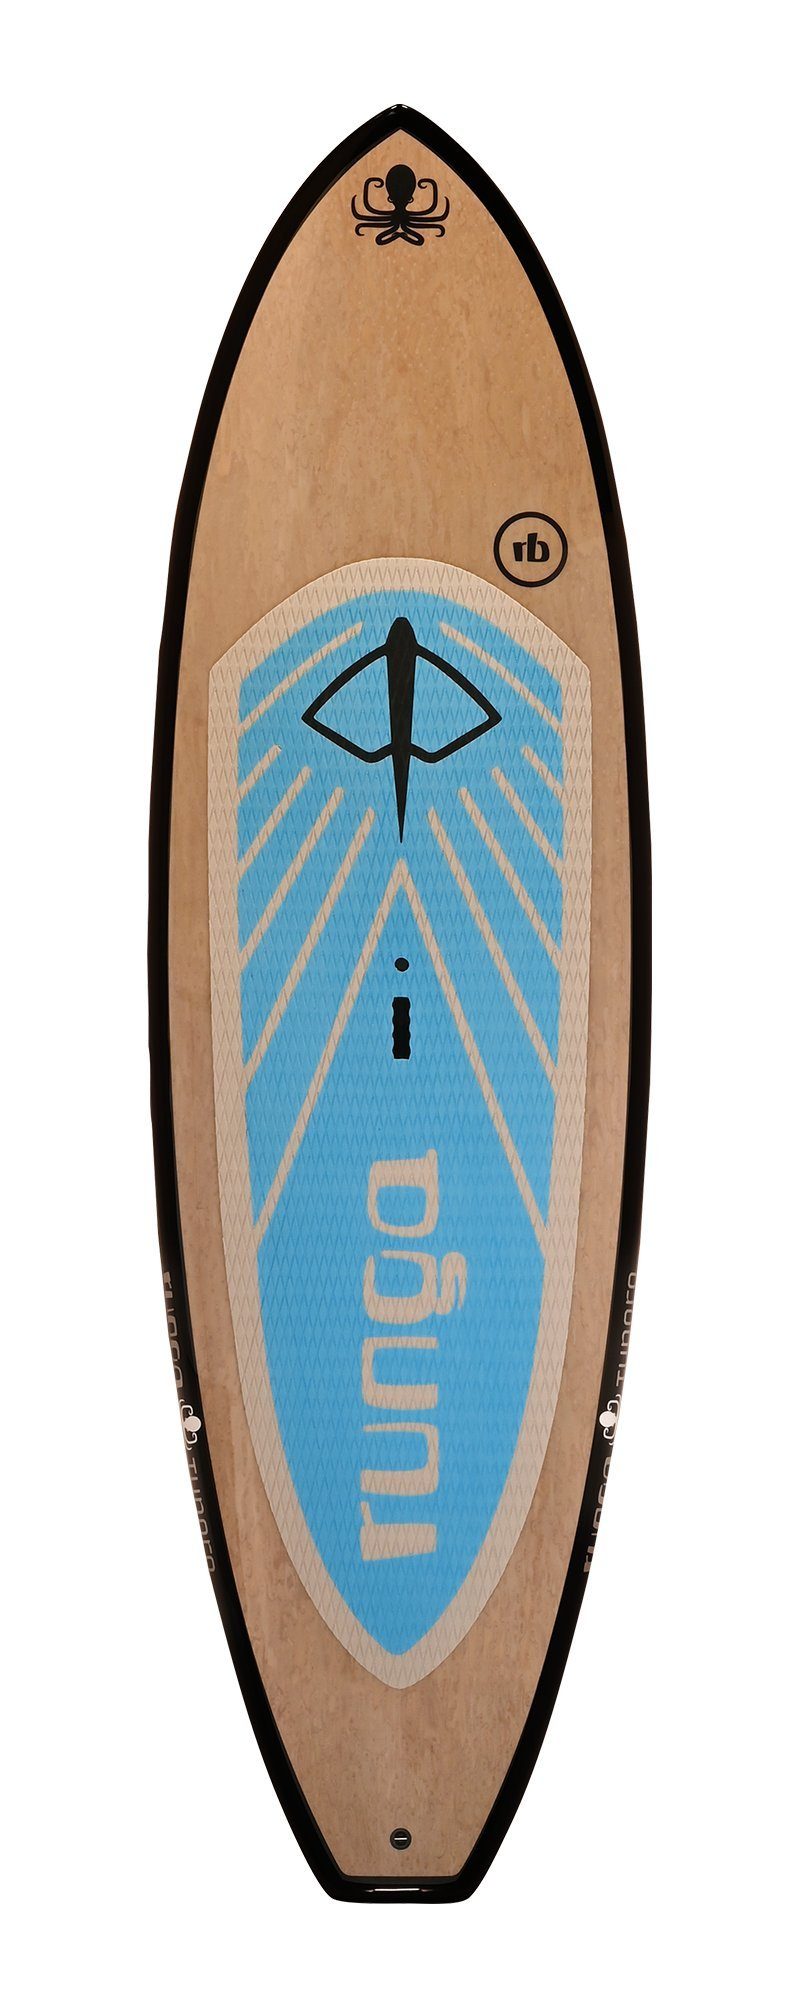 Stand 3-tlg. SUP, Lash Paddling (10.0, BLUE Finnen-Set) Board TUPORO Coiled Runga Runga-Boards Up & SUP-Board inkl. Hard